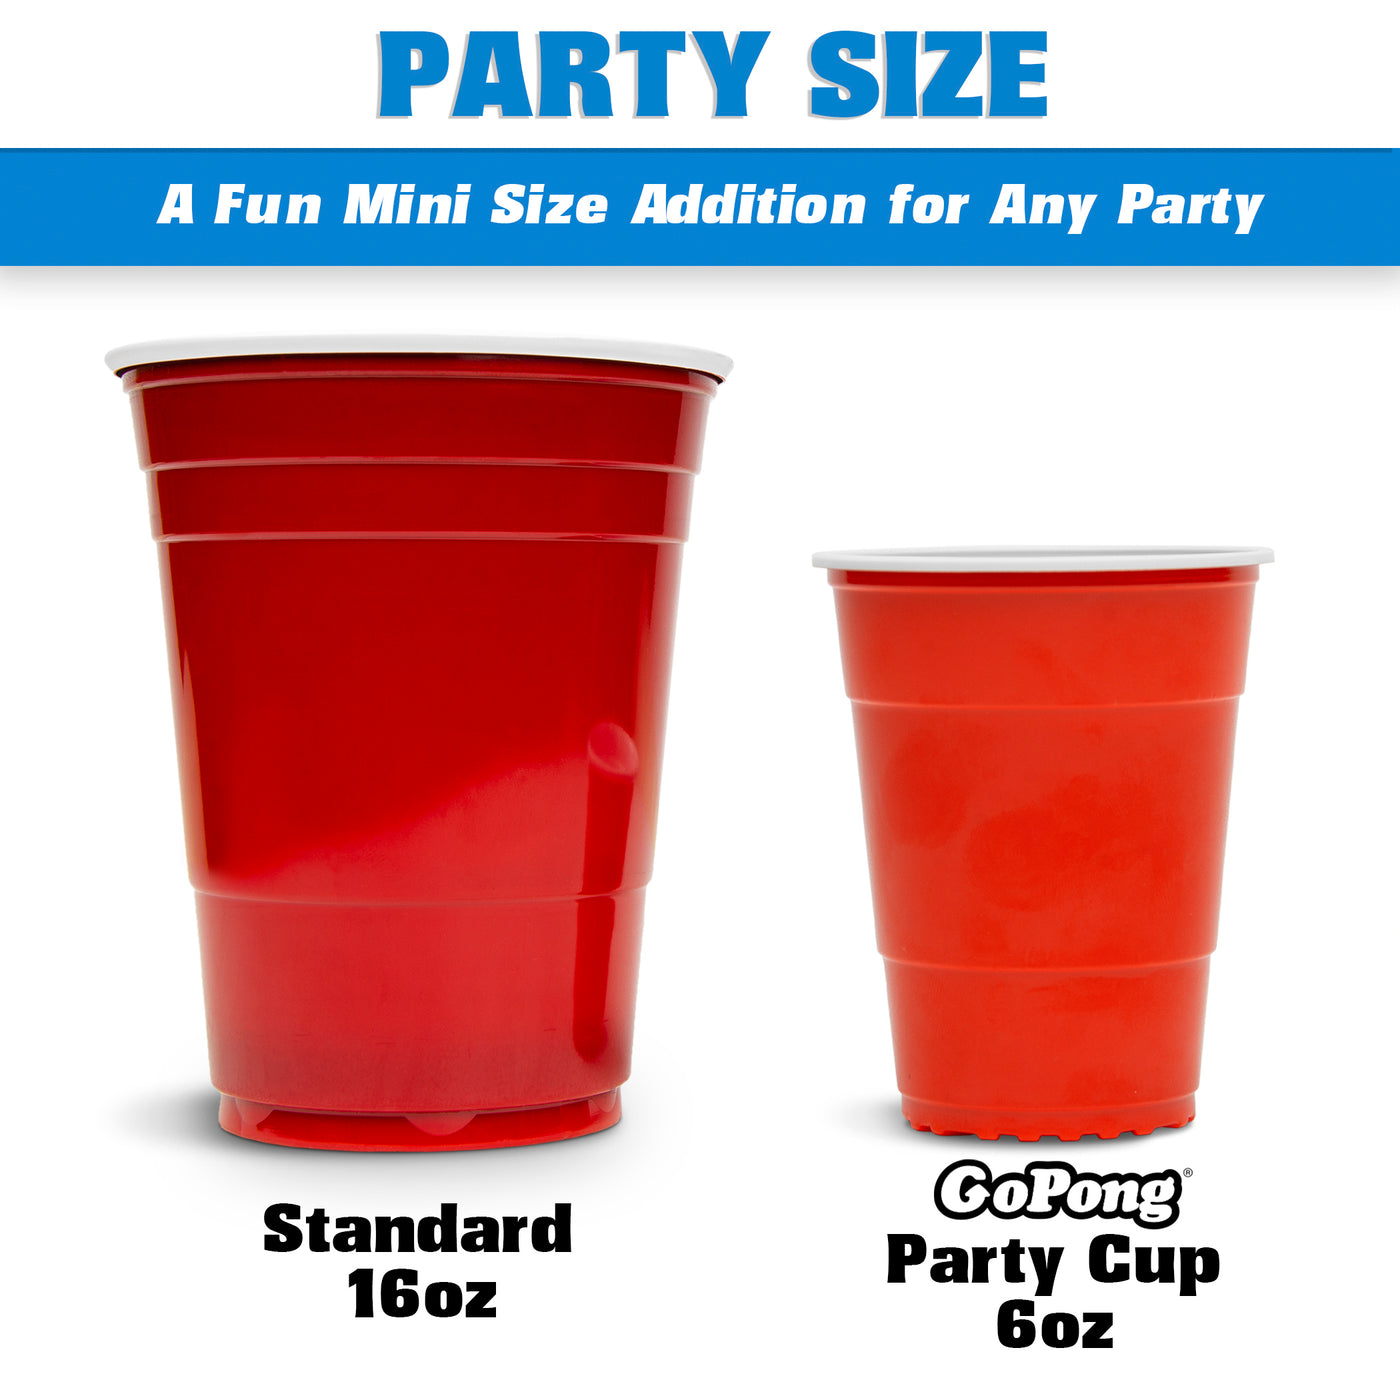 https://www.gopong.com/cdn/shop/products/PARTYCUP-6oz-160_Comparison_05-01-2020_1400x.jpg?v=1631214735